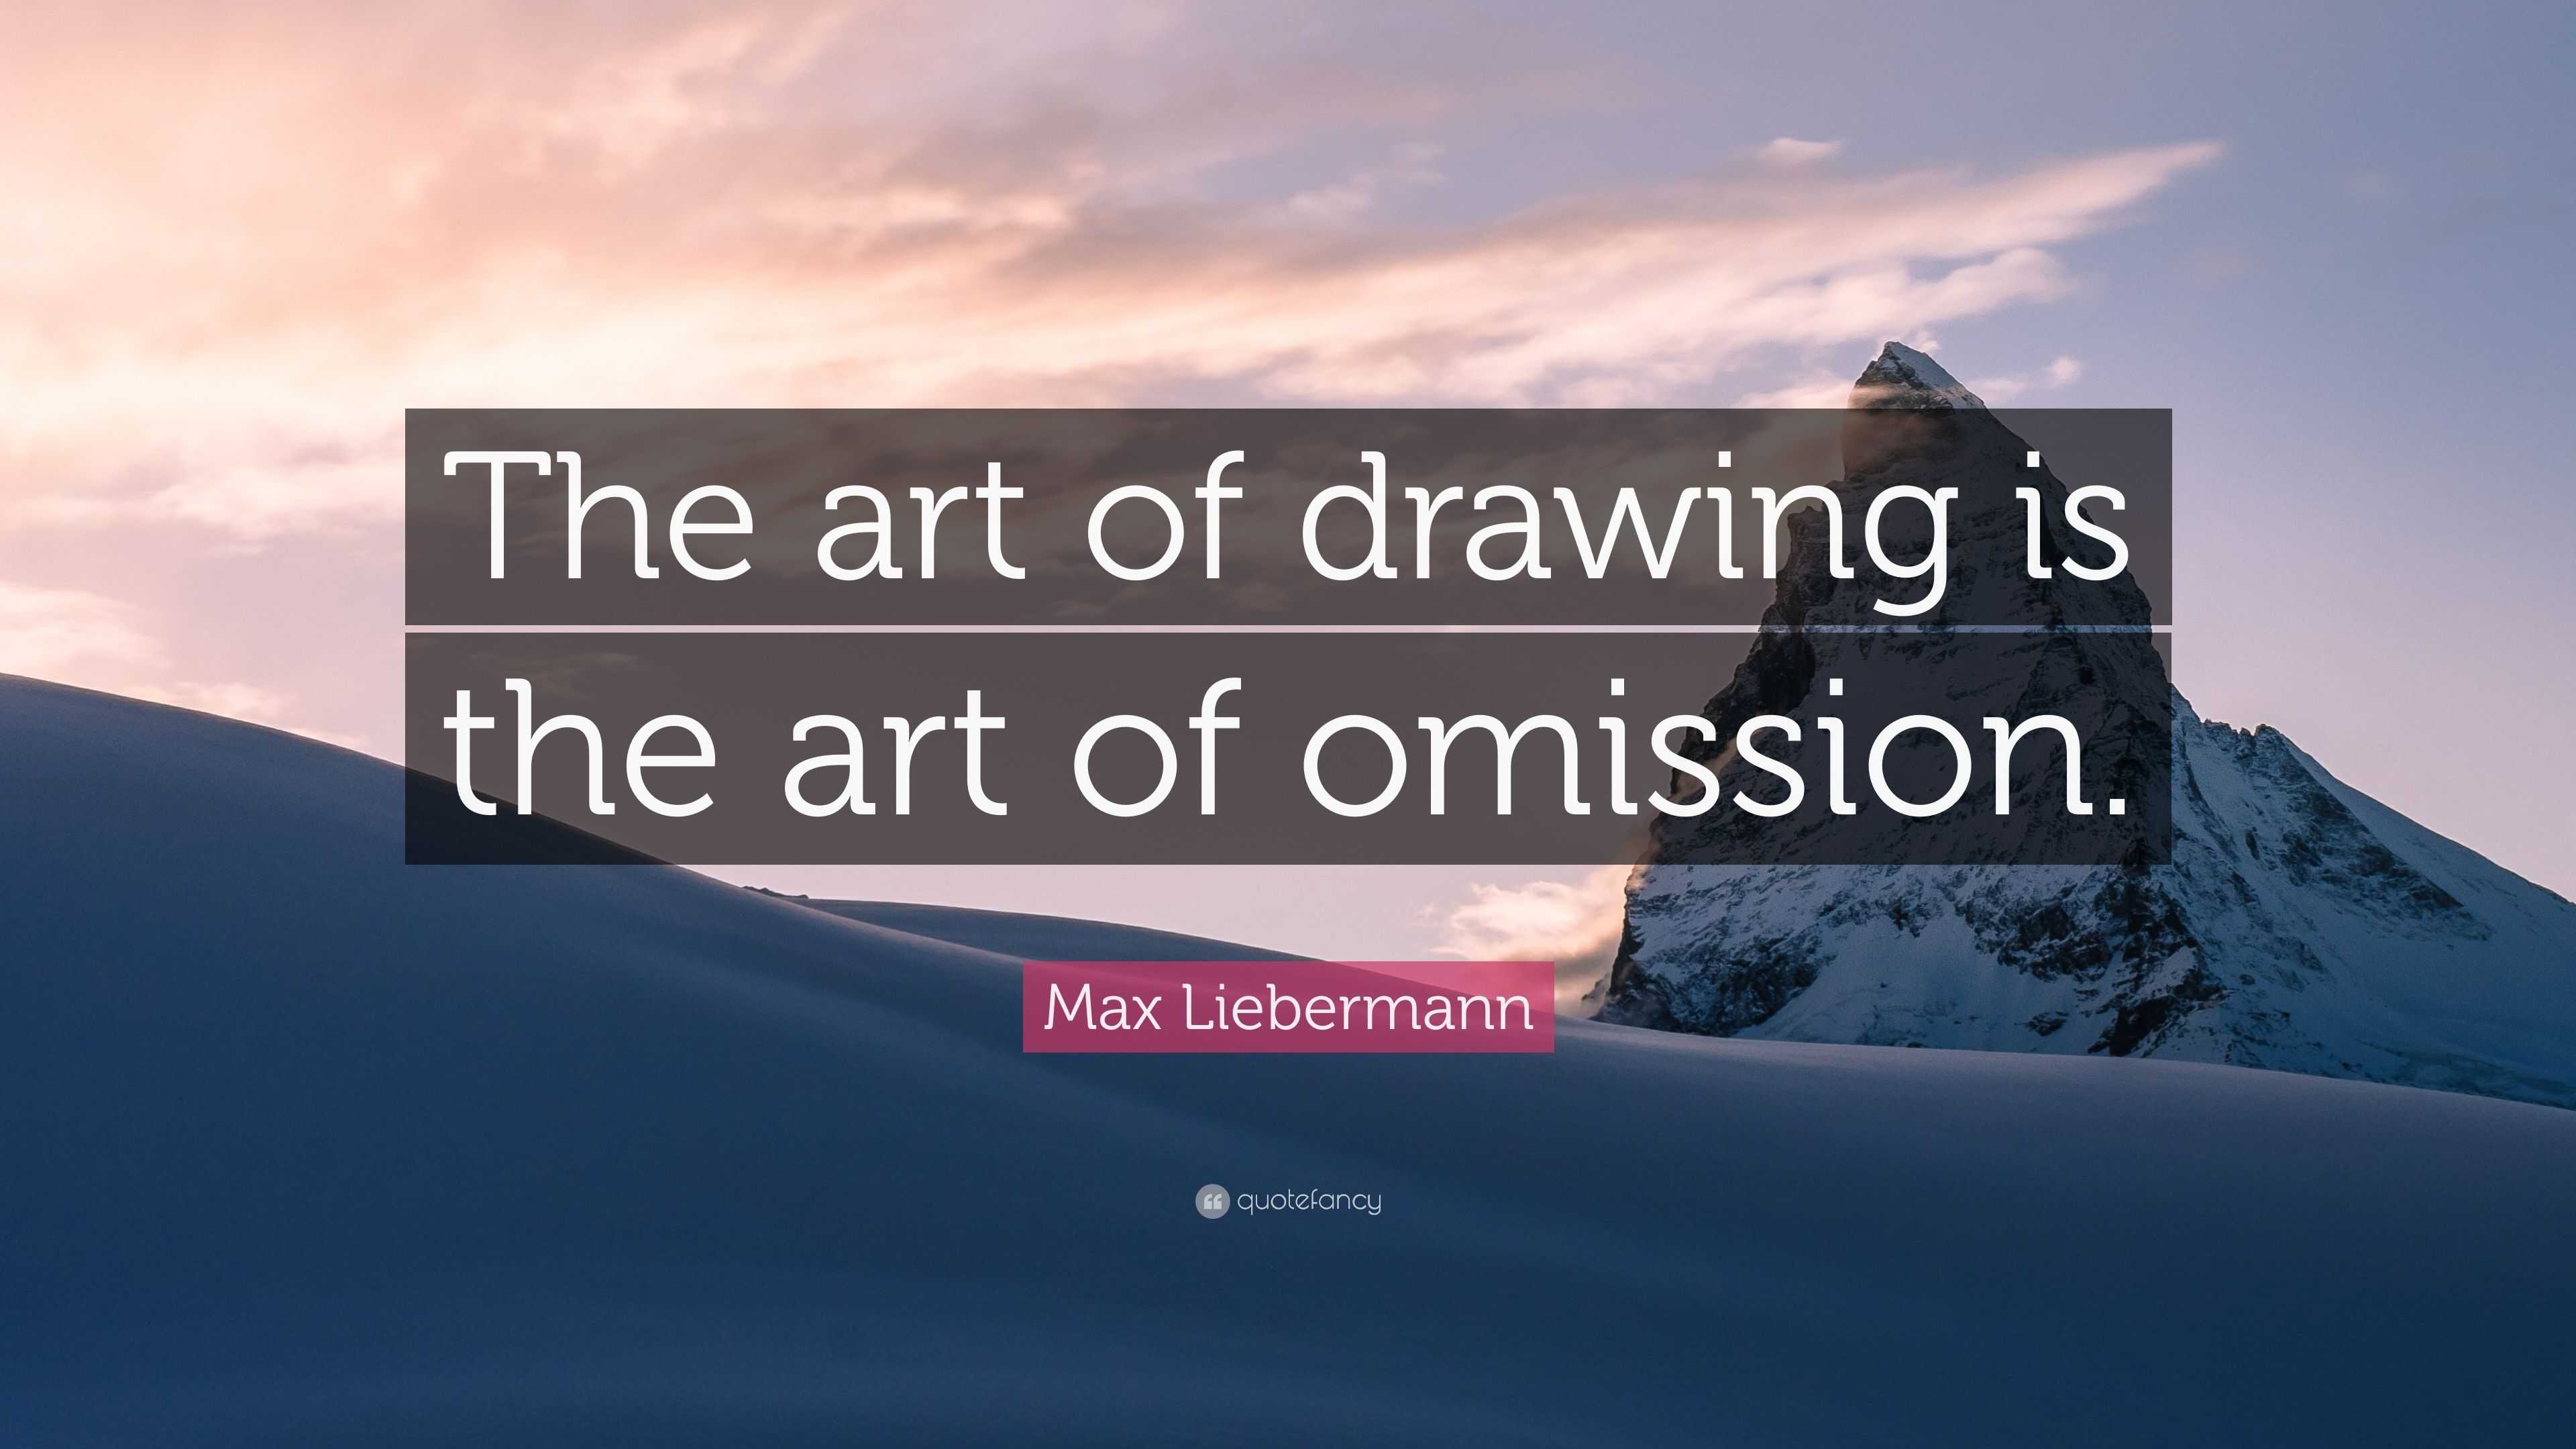 life is the art of drawing without an eraser, quotes about life, abstract,  life quote, wisdom graphic concept design, motivational and inspirational  quotes, vector illustration:: tasmeemME.com